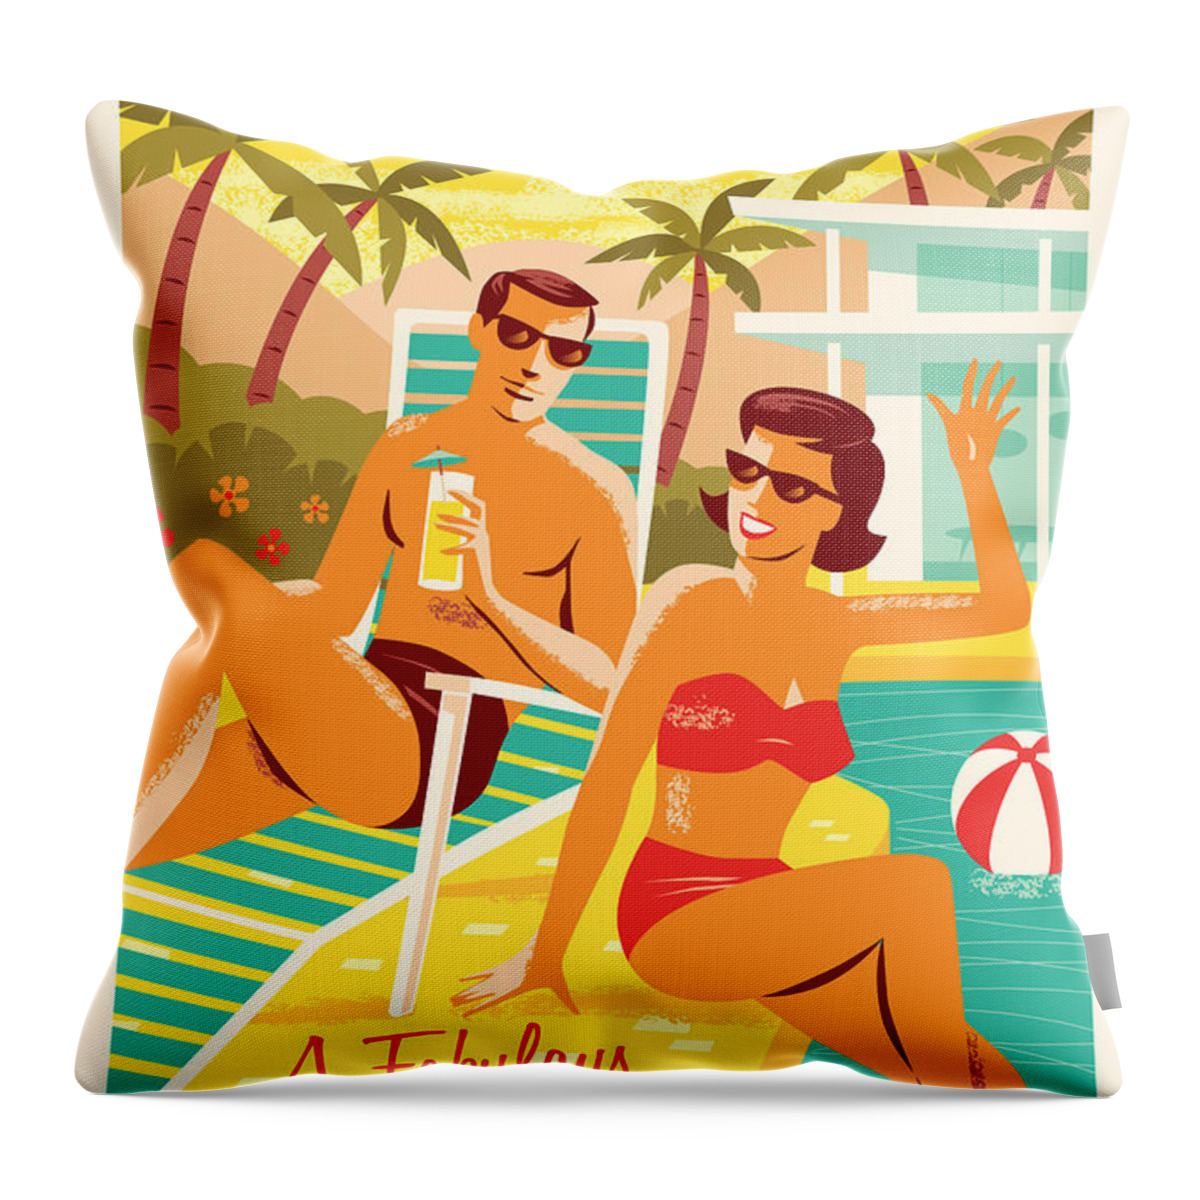 Travel Poster Throw Pillow featuring the digital art Palm Springs Poster - Retro Travel by Jim Zahniser